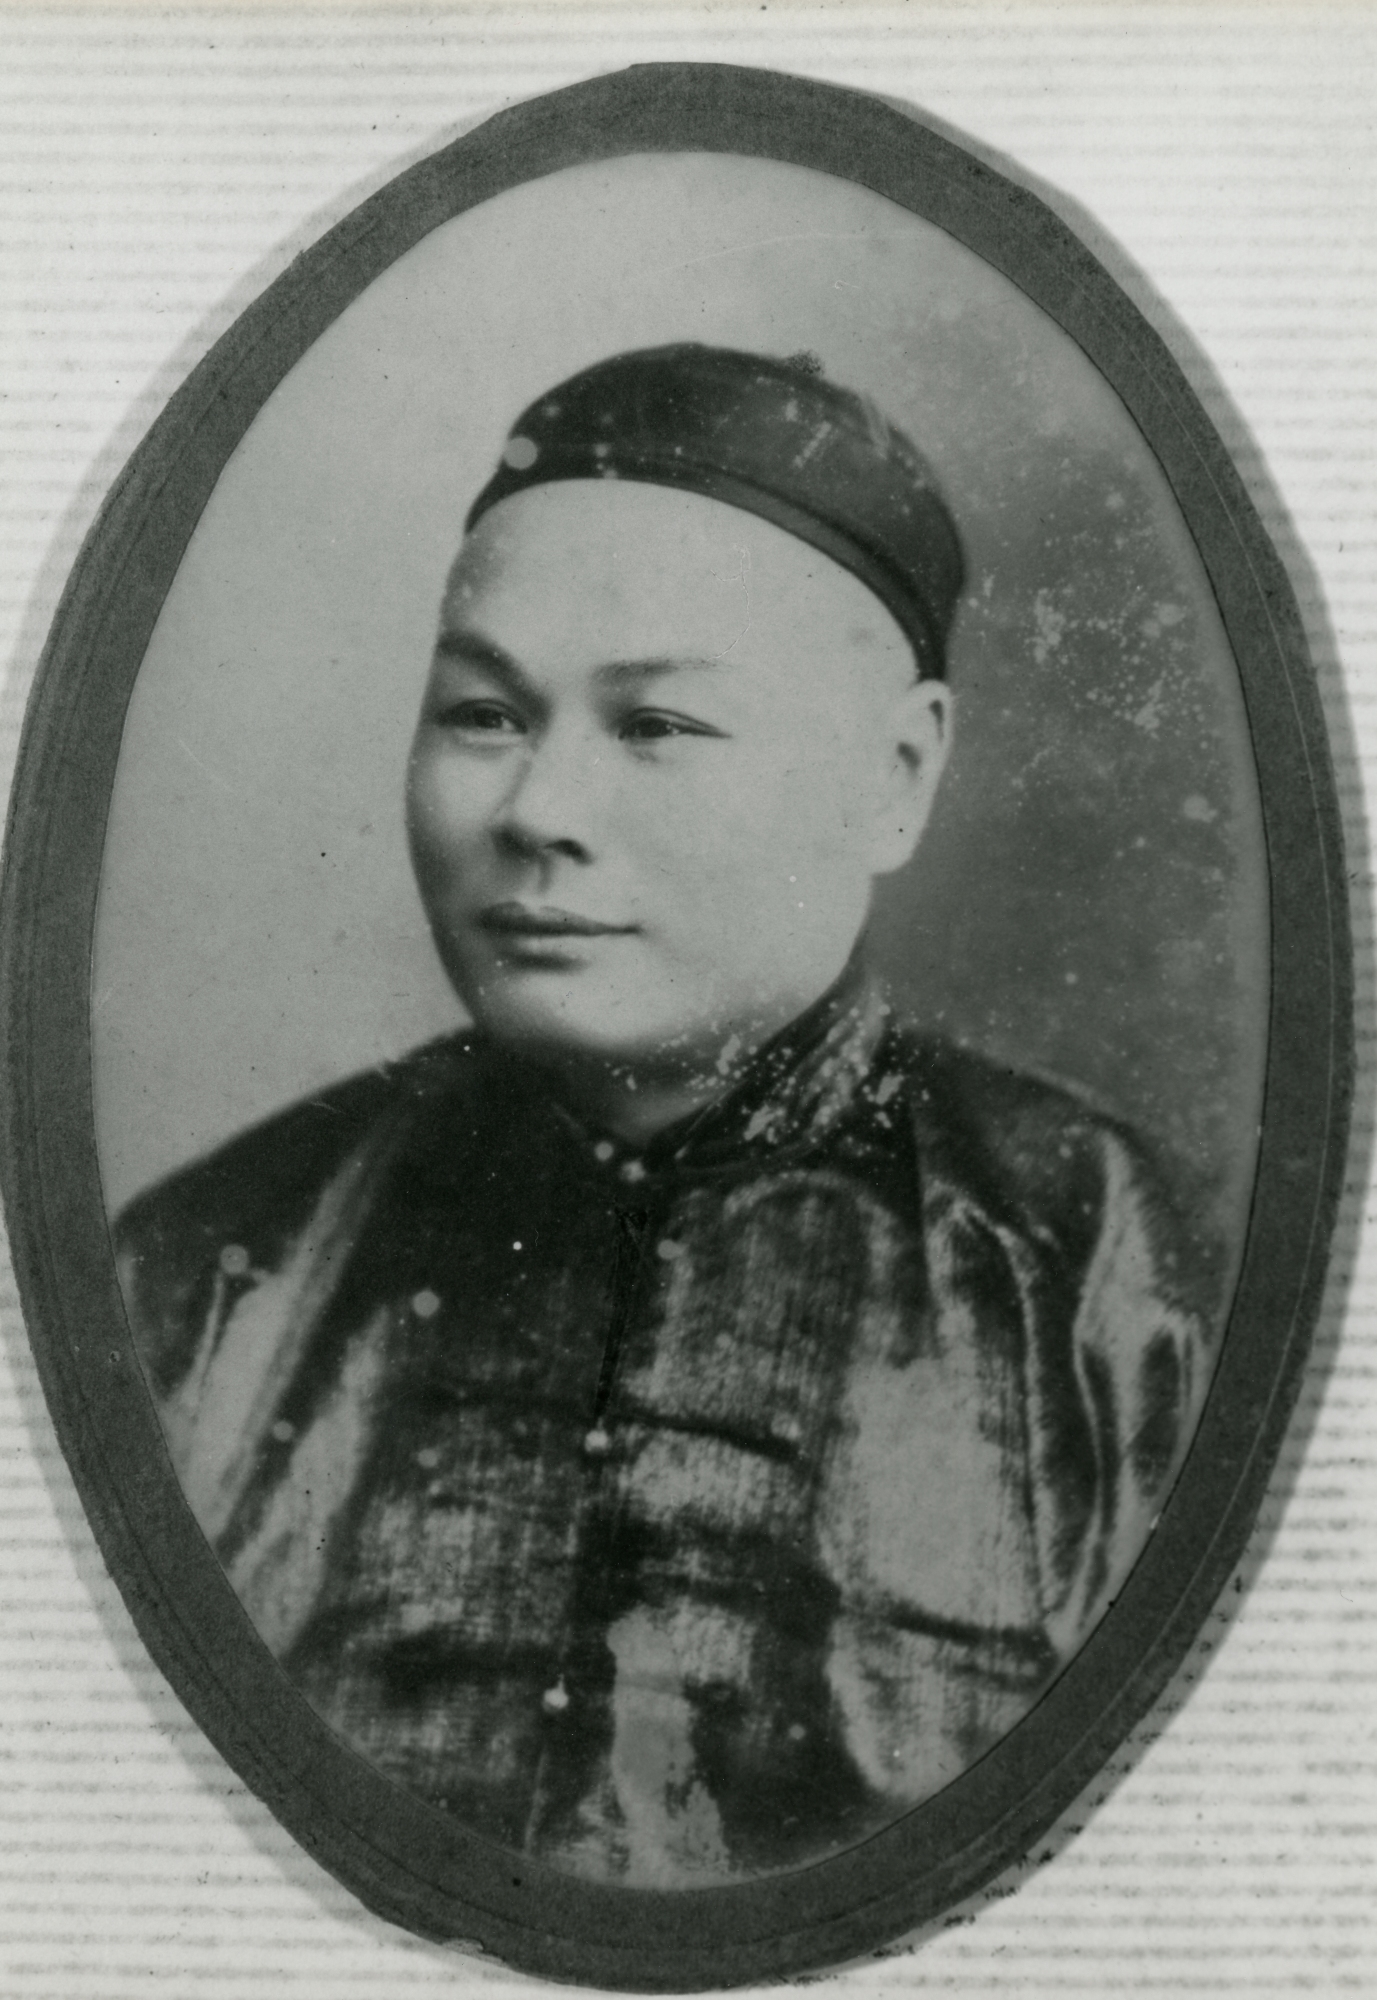 Ho Kom-tong (1866-1950). Ho Kom-tong, Sir Robert Ho Tung (1862-1956) and Ho Fook (1863-1926) were half-brothers. Ho Kom-tong was born in the same year as Dr Sun Yat-sen, and also attended Government Central School. He subsequently worked as a comprador in Jardine, Matheson & Co. Ltd.